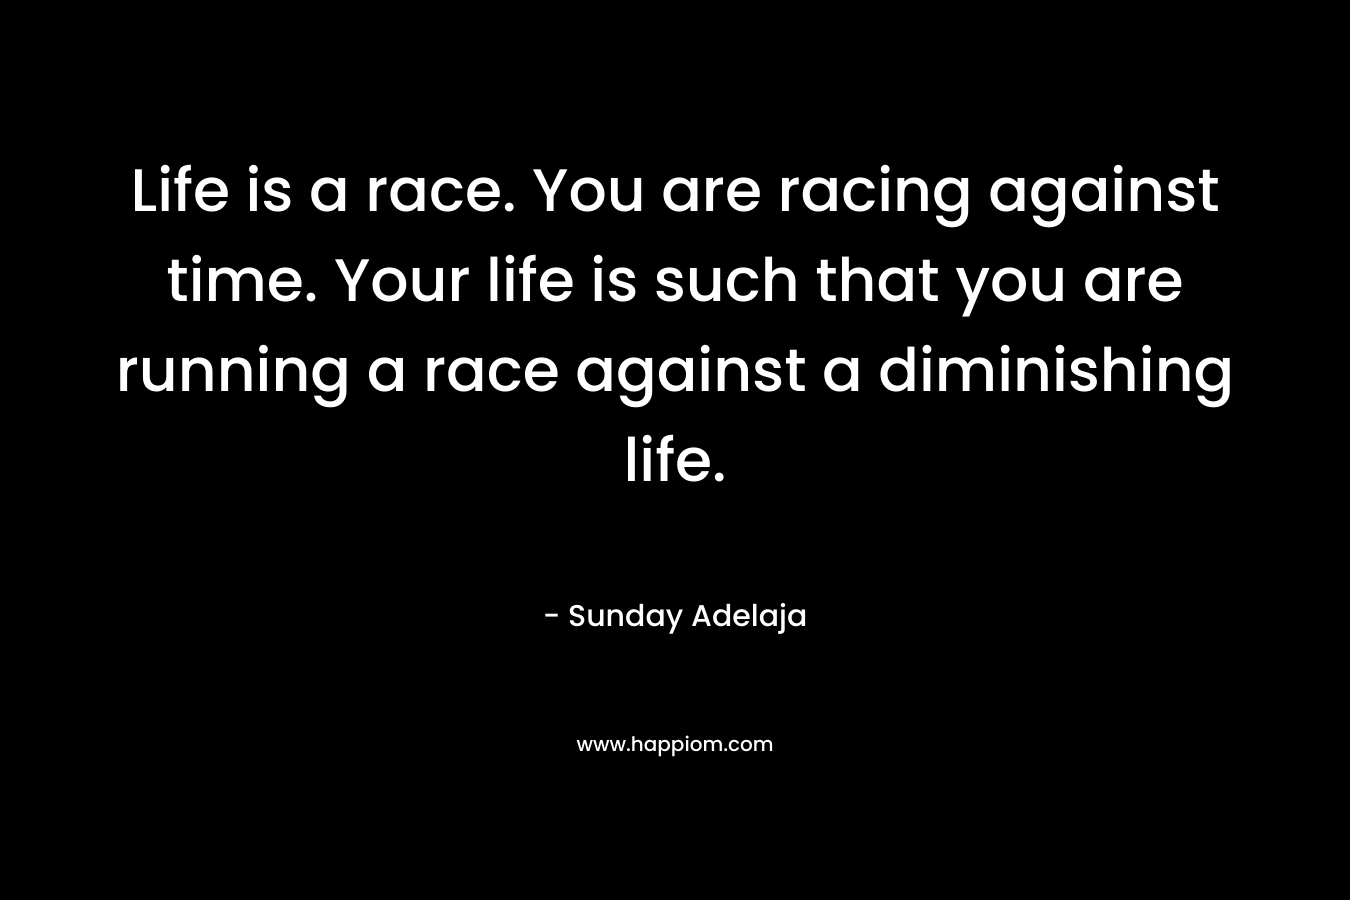 Life is a race. You are racing against time. Your life is such that you are running a race against a diminishing life.